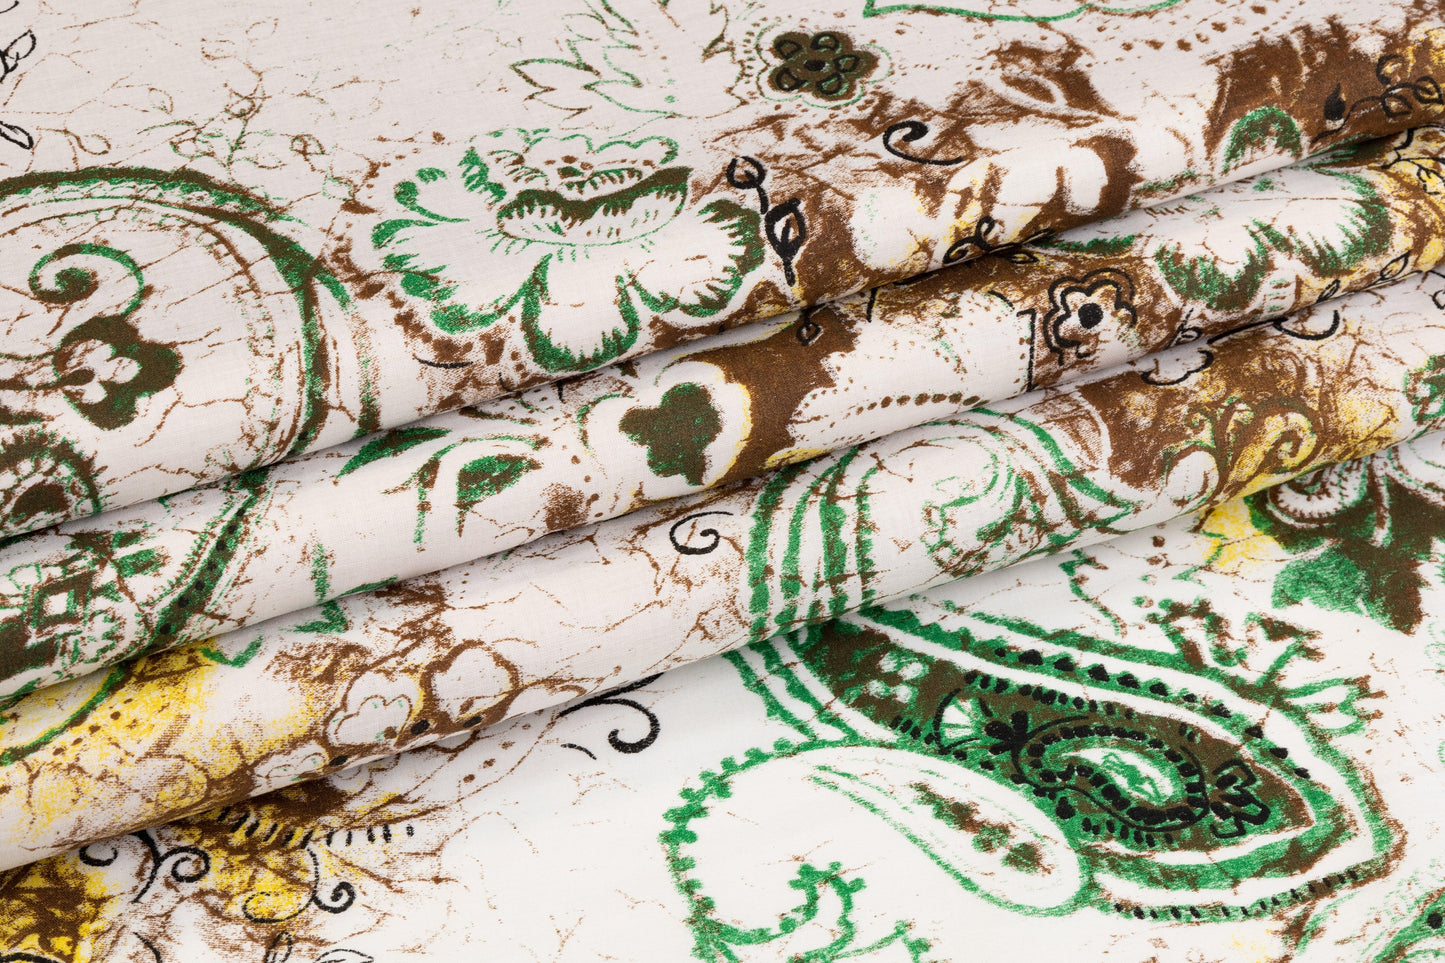 Paisley Floral Cotton Voile - White, Green, Brown, Yellow - Prime Fabrics